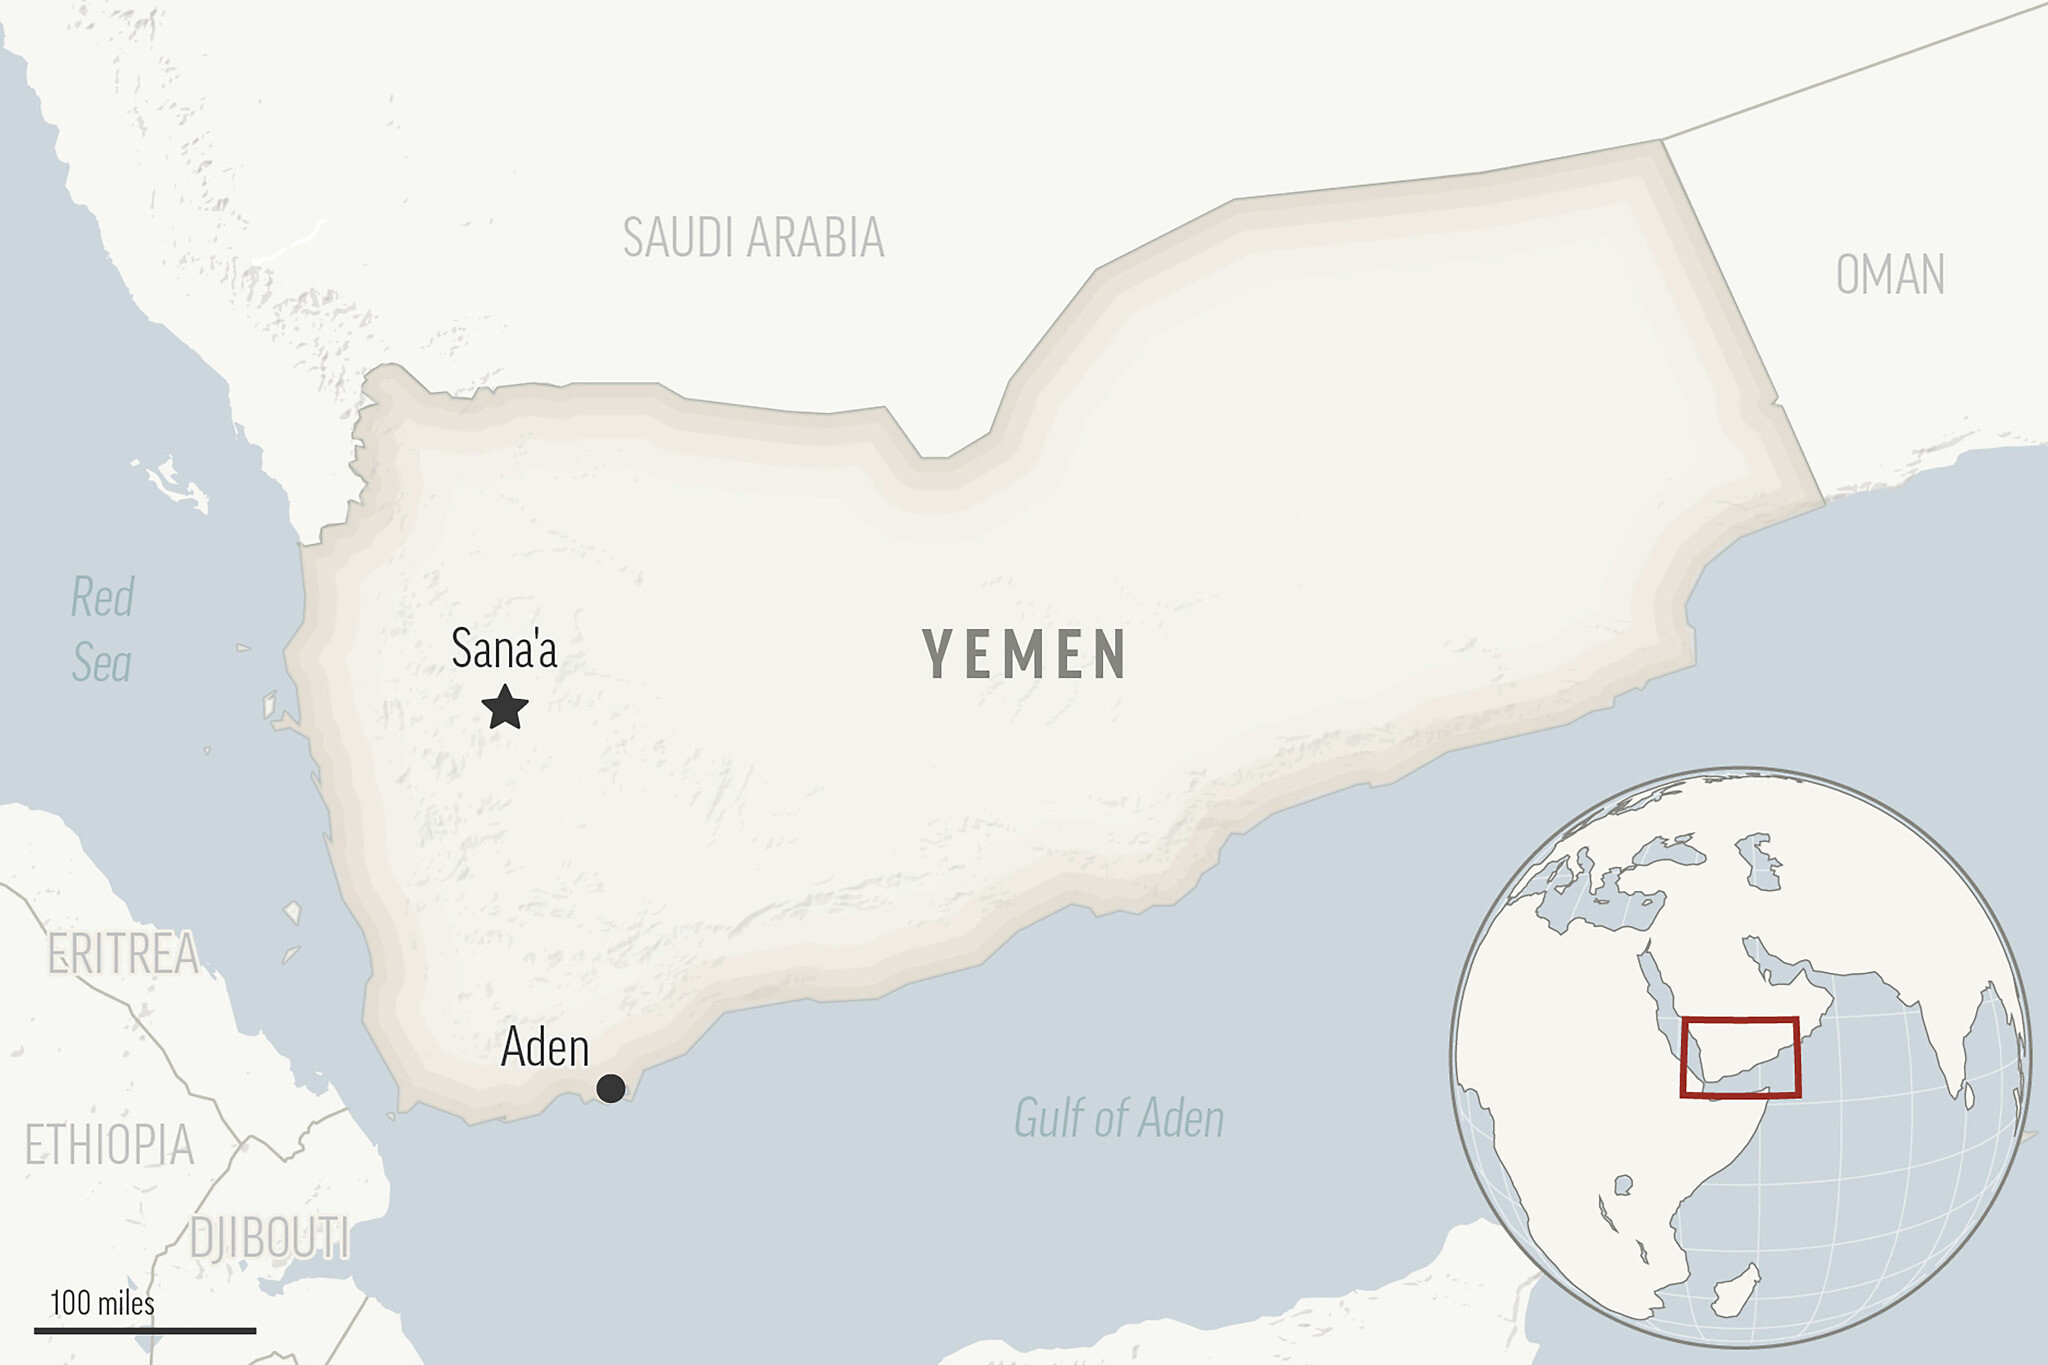 Eagle Bulk Ship Struck by Missile in Gulf of Aden